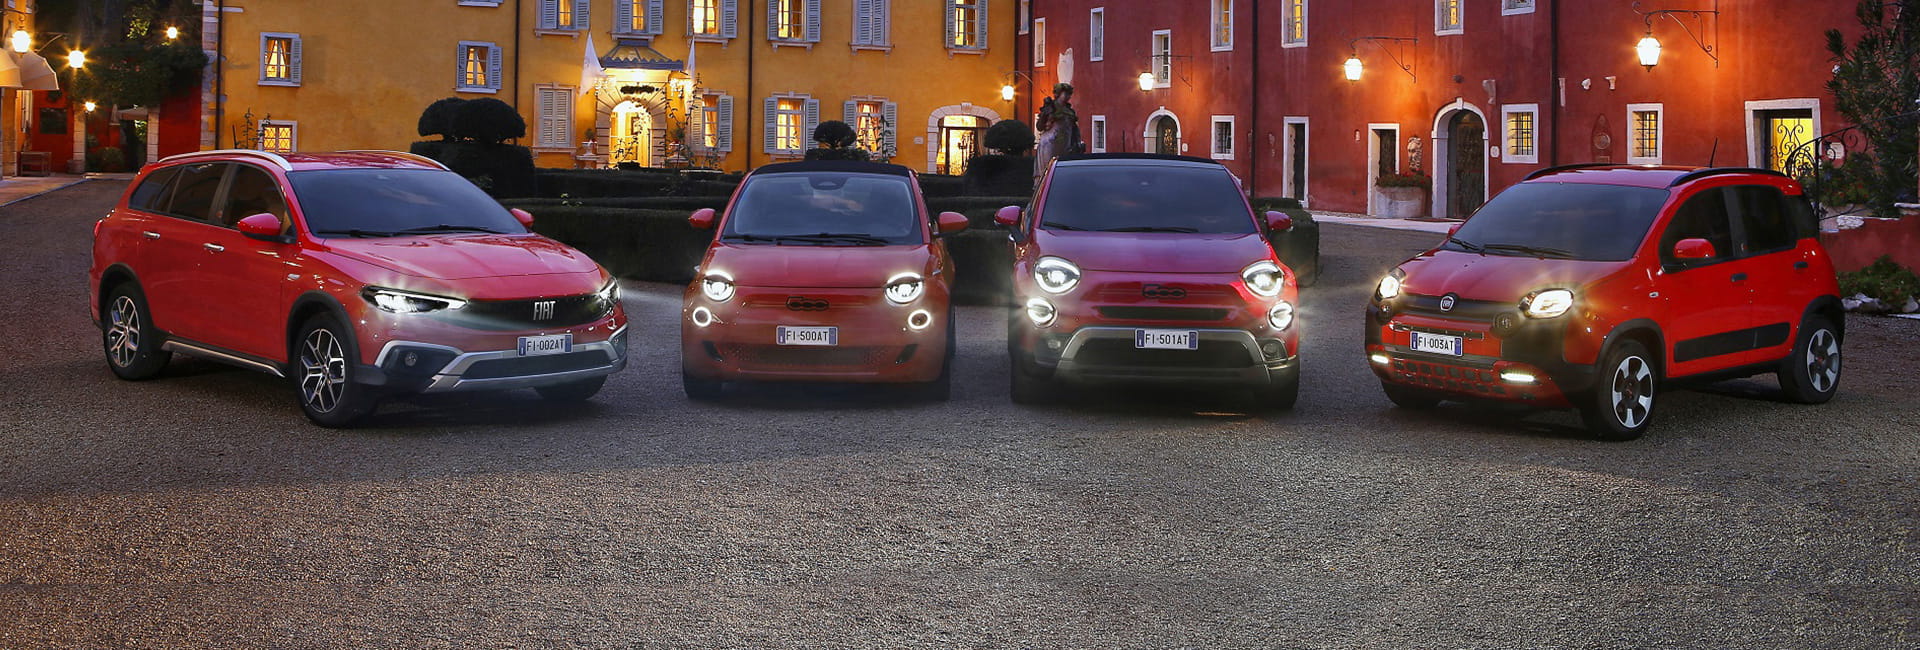 fiat-supporta-red